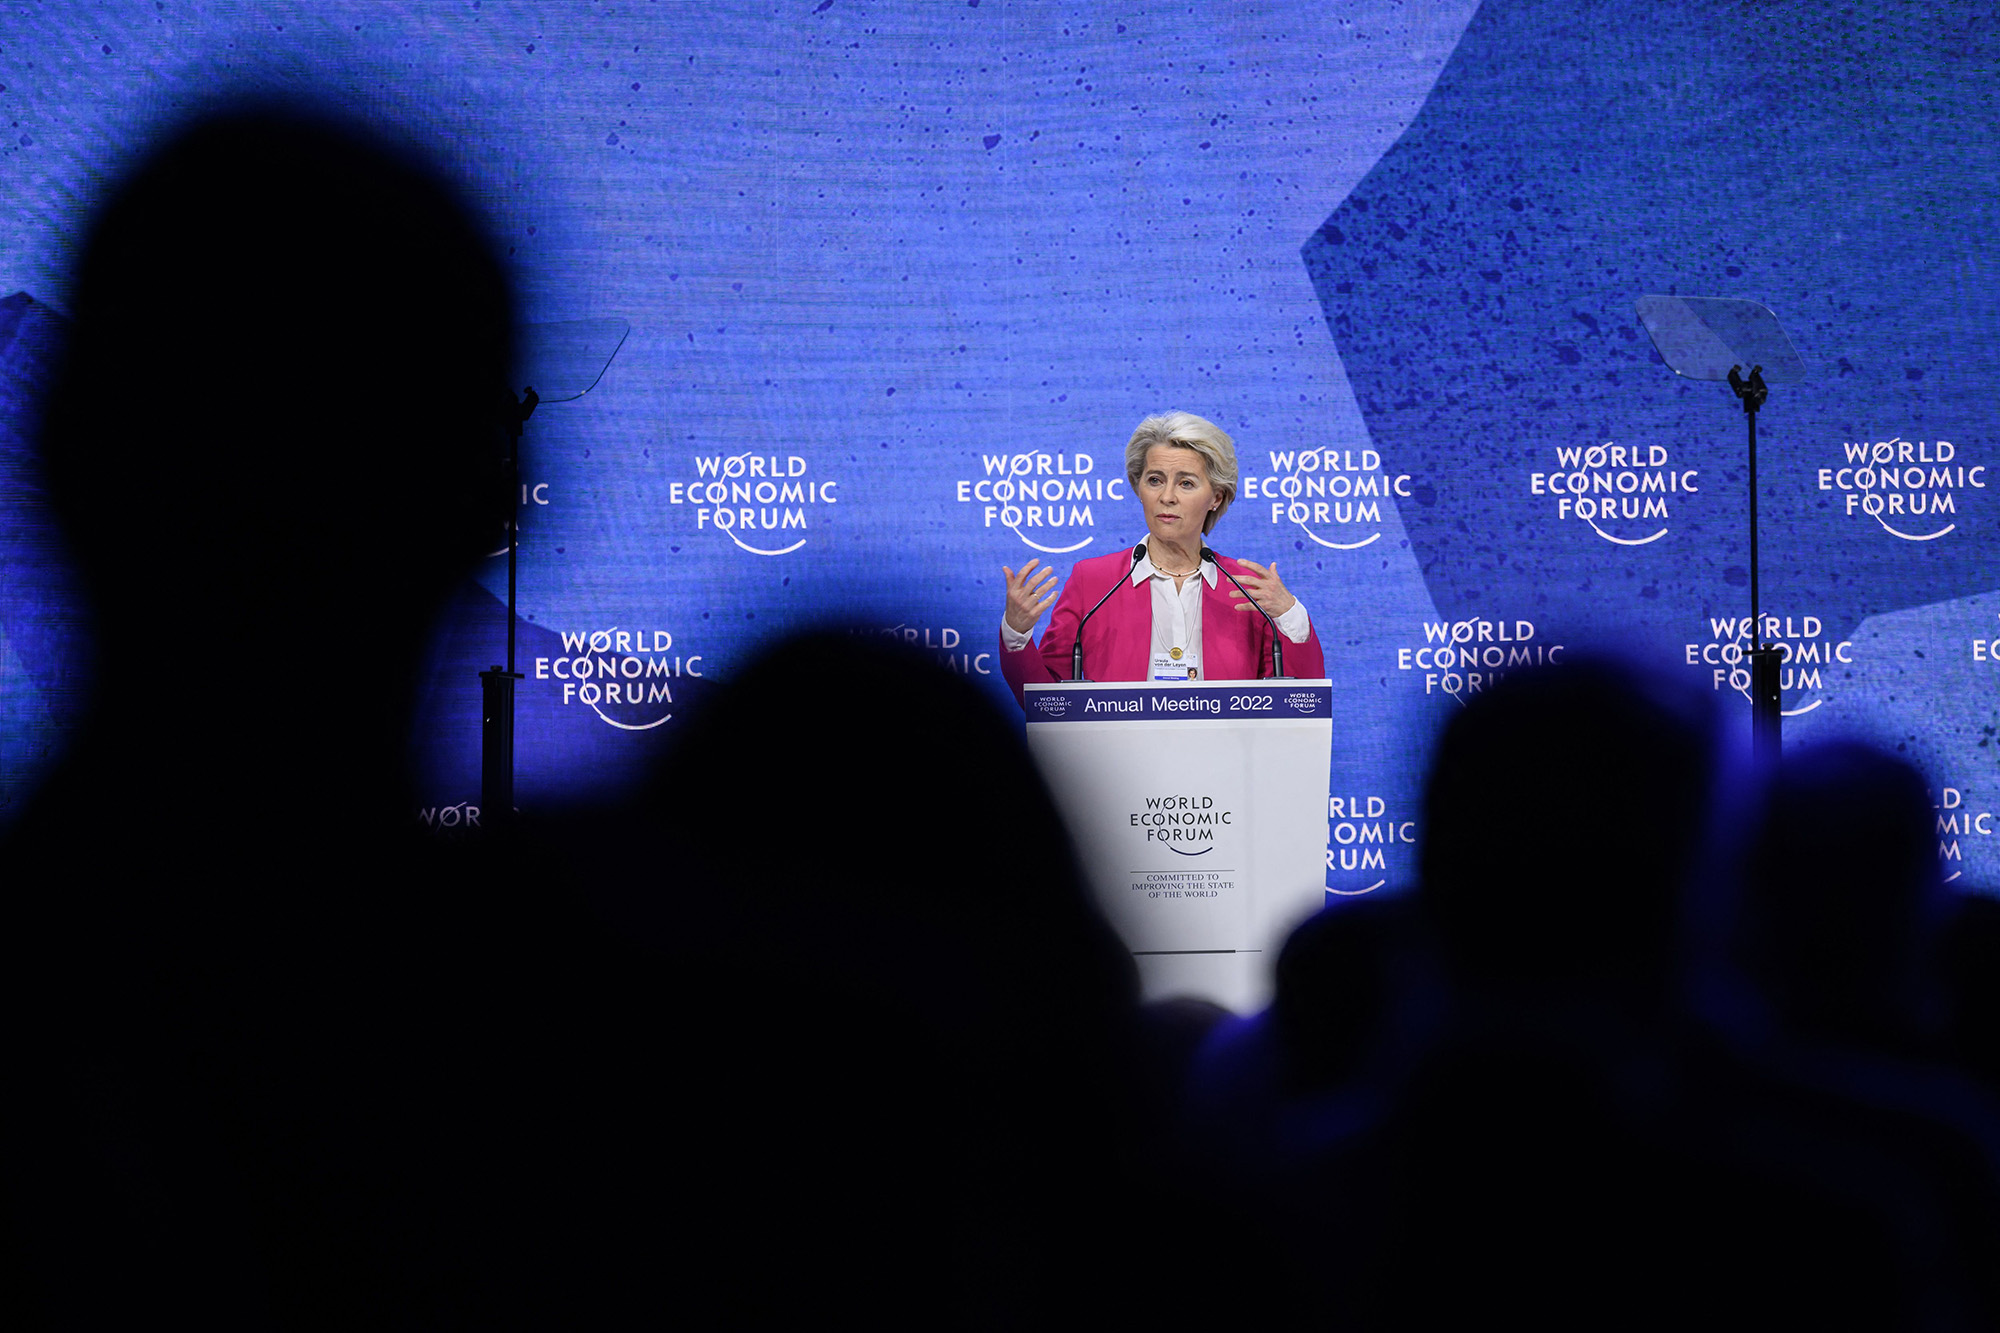 European Commission President Ursula von der Leyen addresses the assembly at the World Economic Forum (WEF) annual meeting in Davos, Switzerland, on May 24.